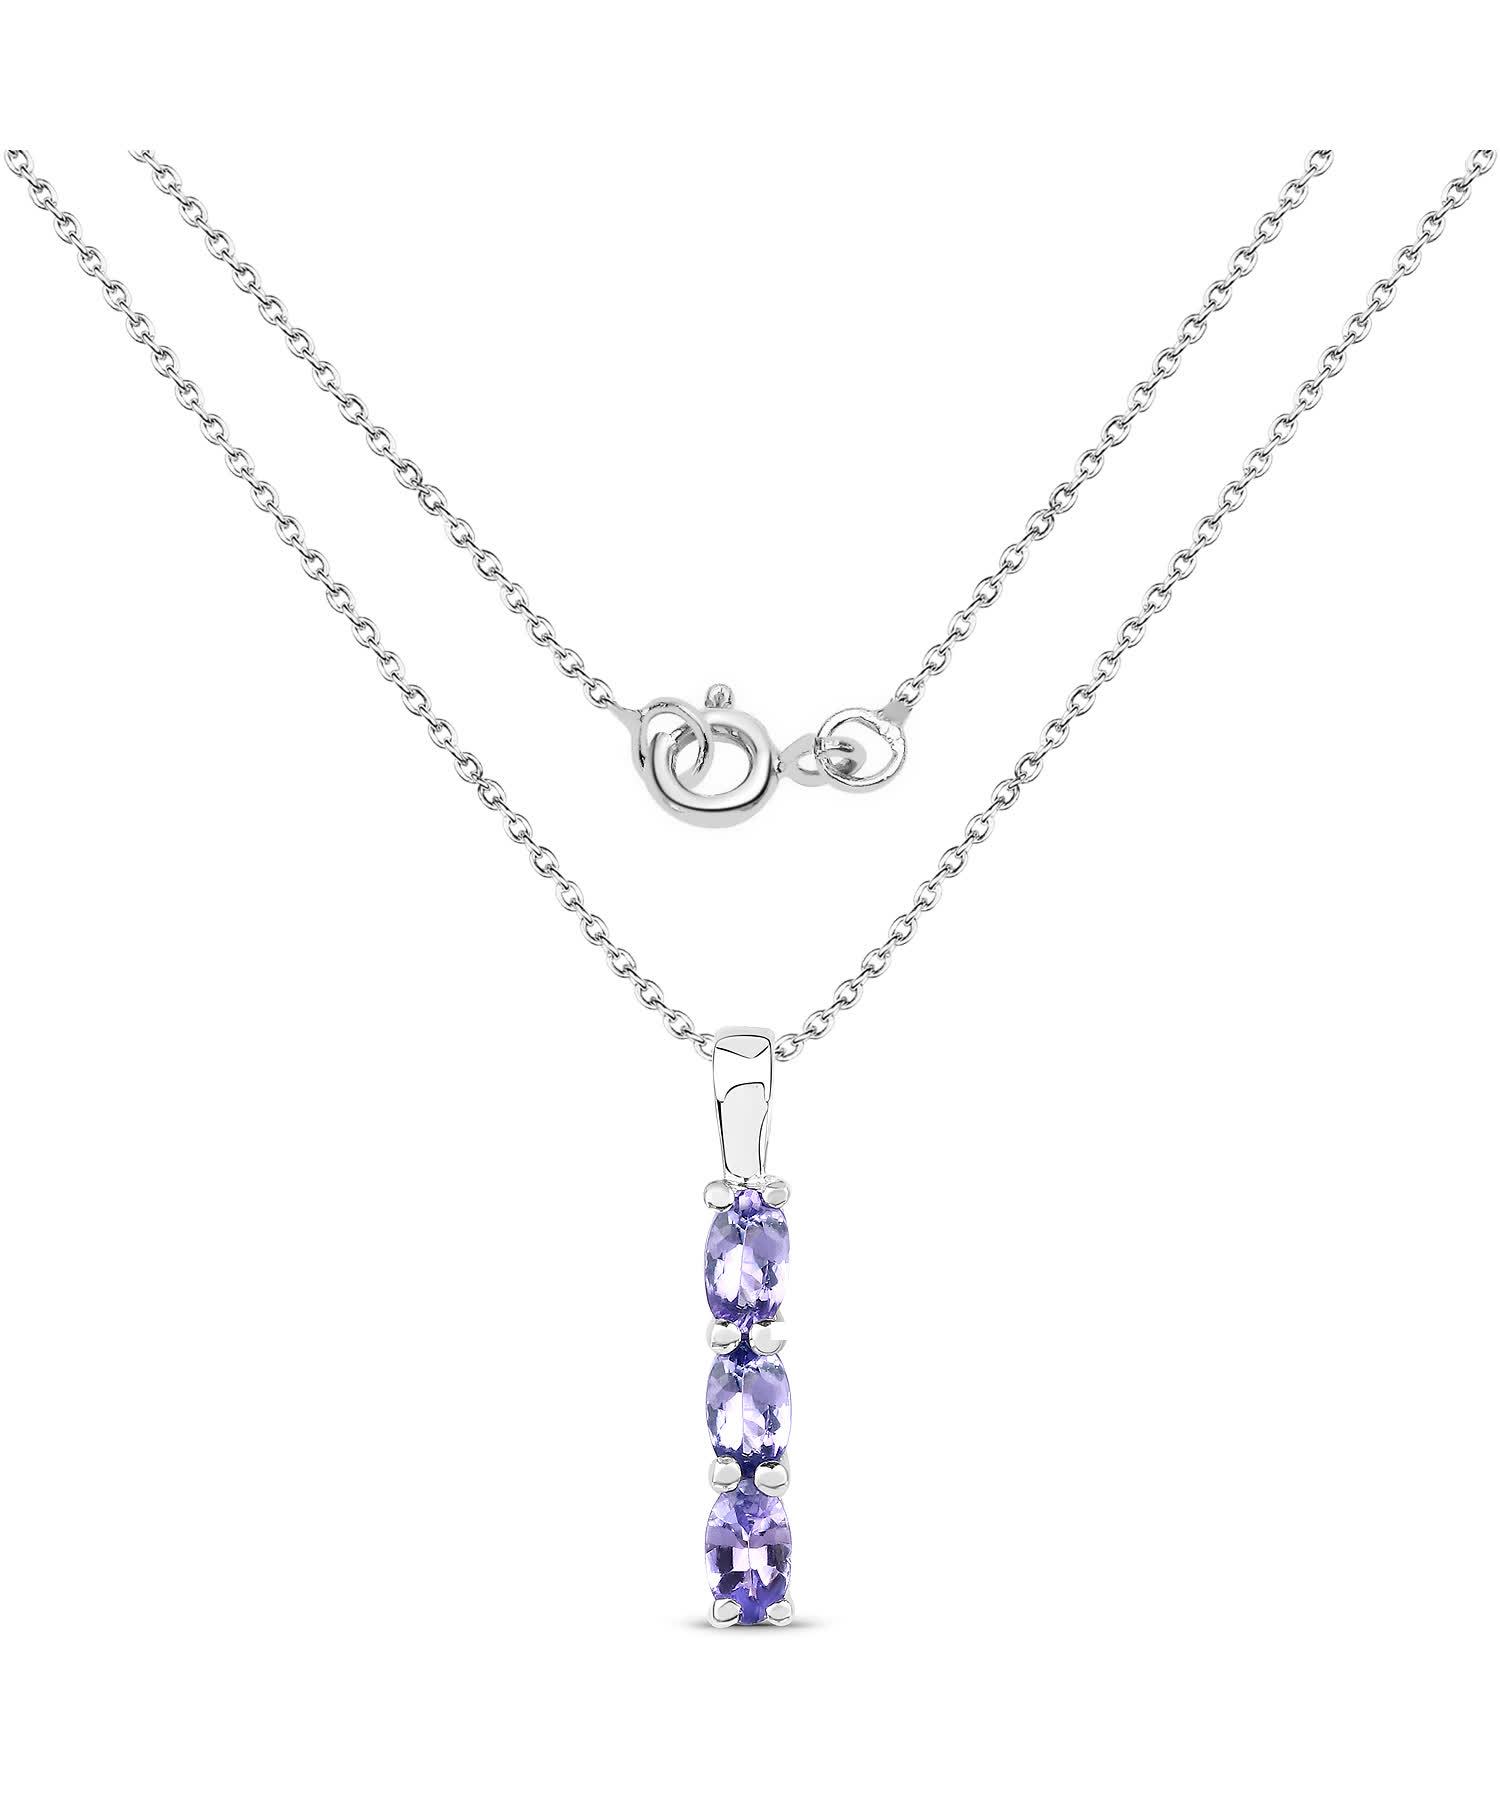 0.75ctw Natural Lavender Tanzanite Rhodium Plated 925 Sterling Silver Three-Stone Pendant With Chain View 2